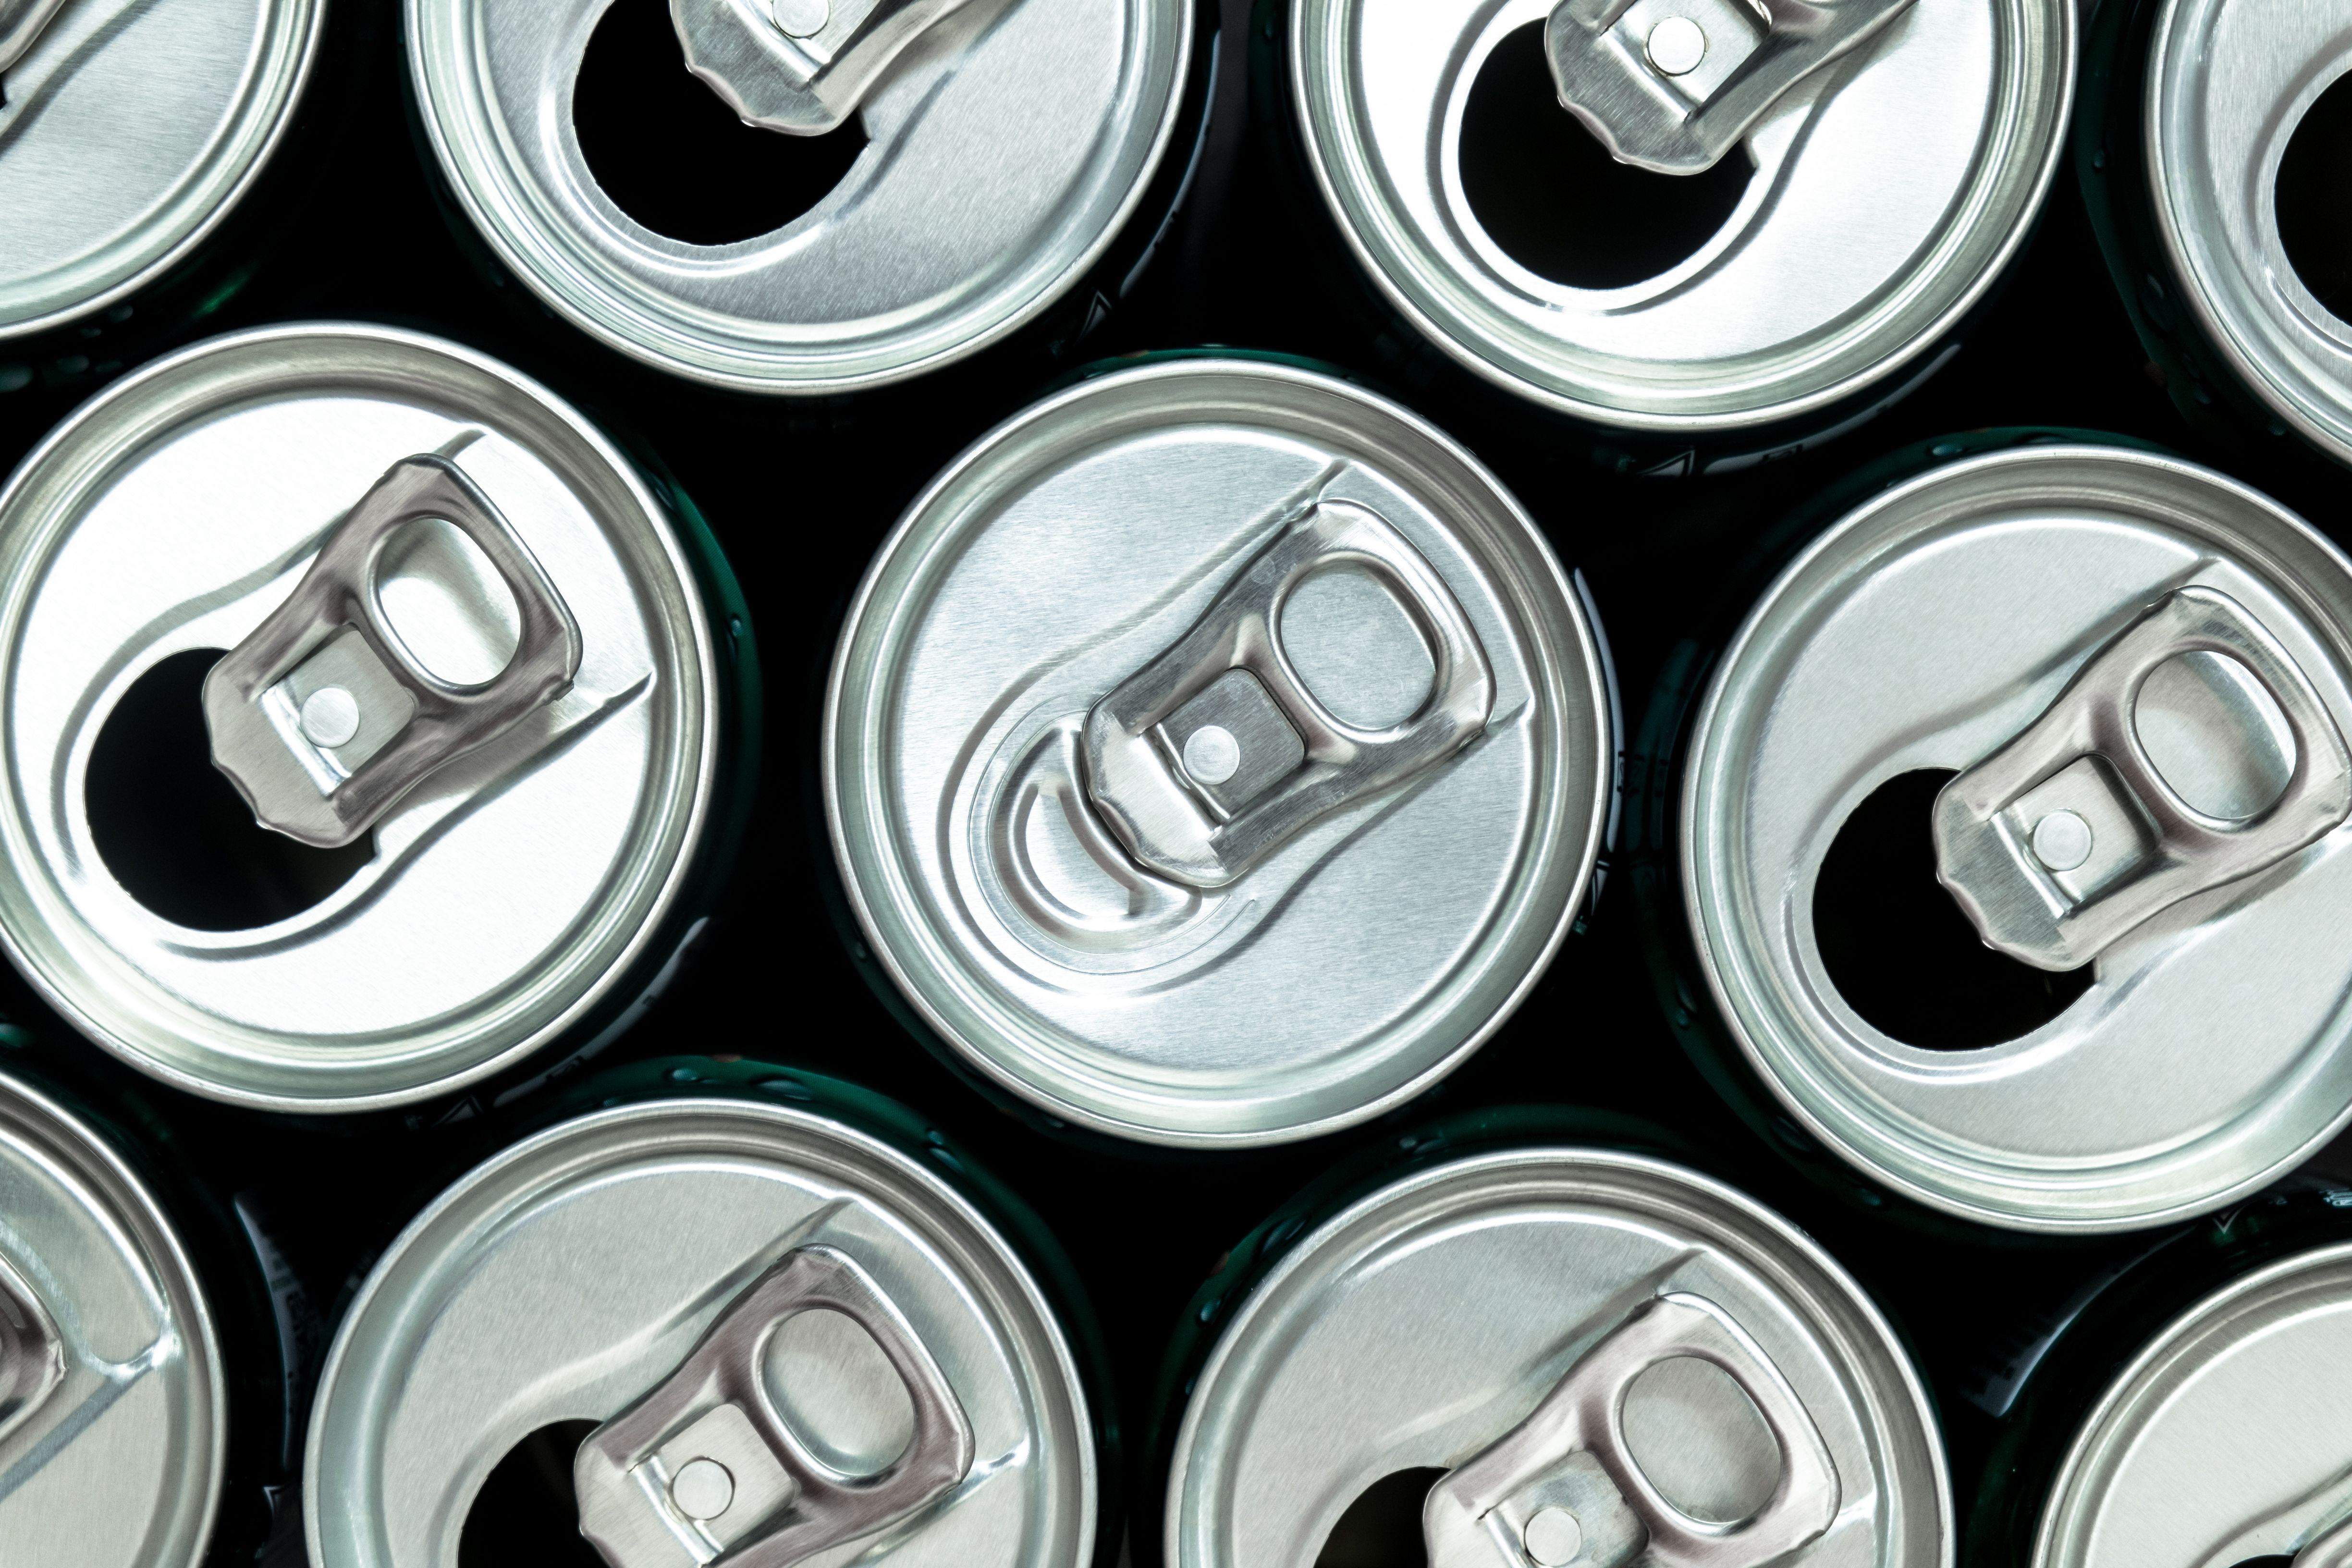 One energy drink a month increases risk of disturbed sleep, study